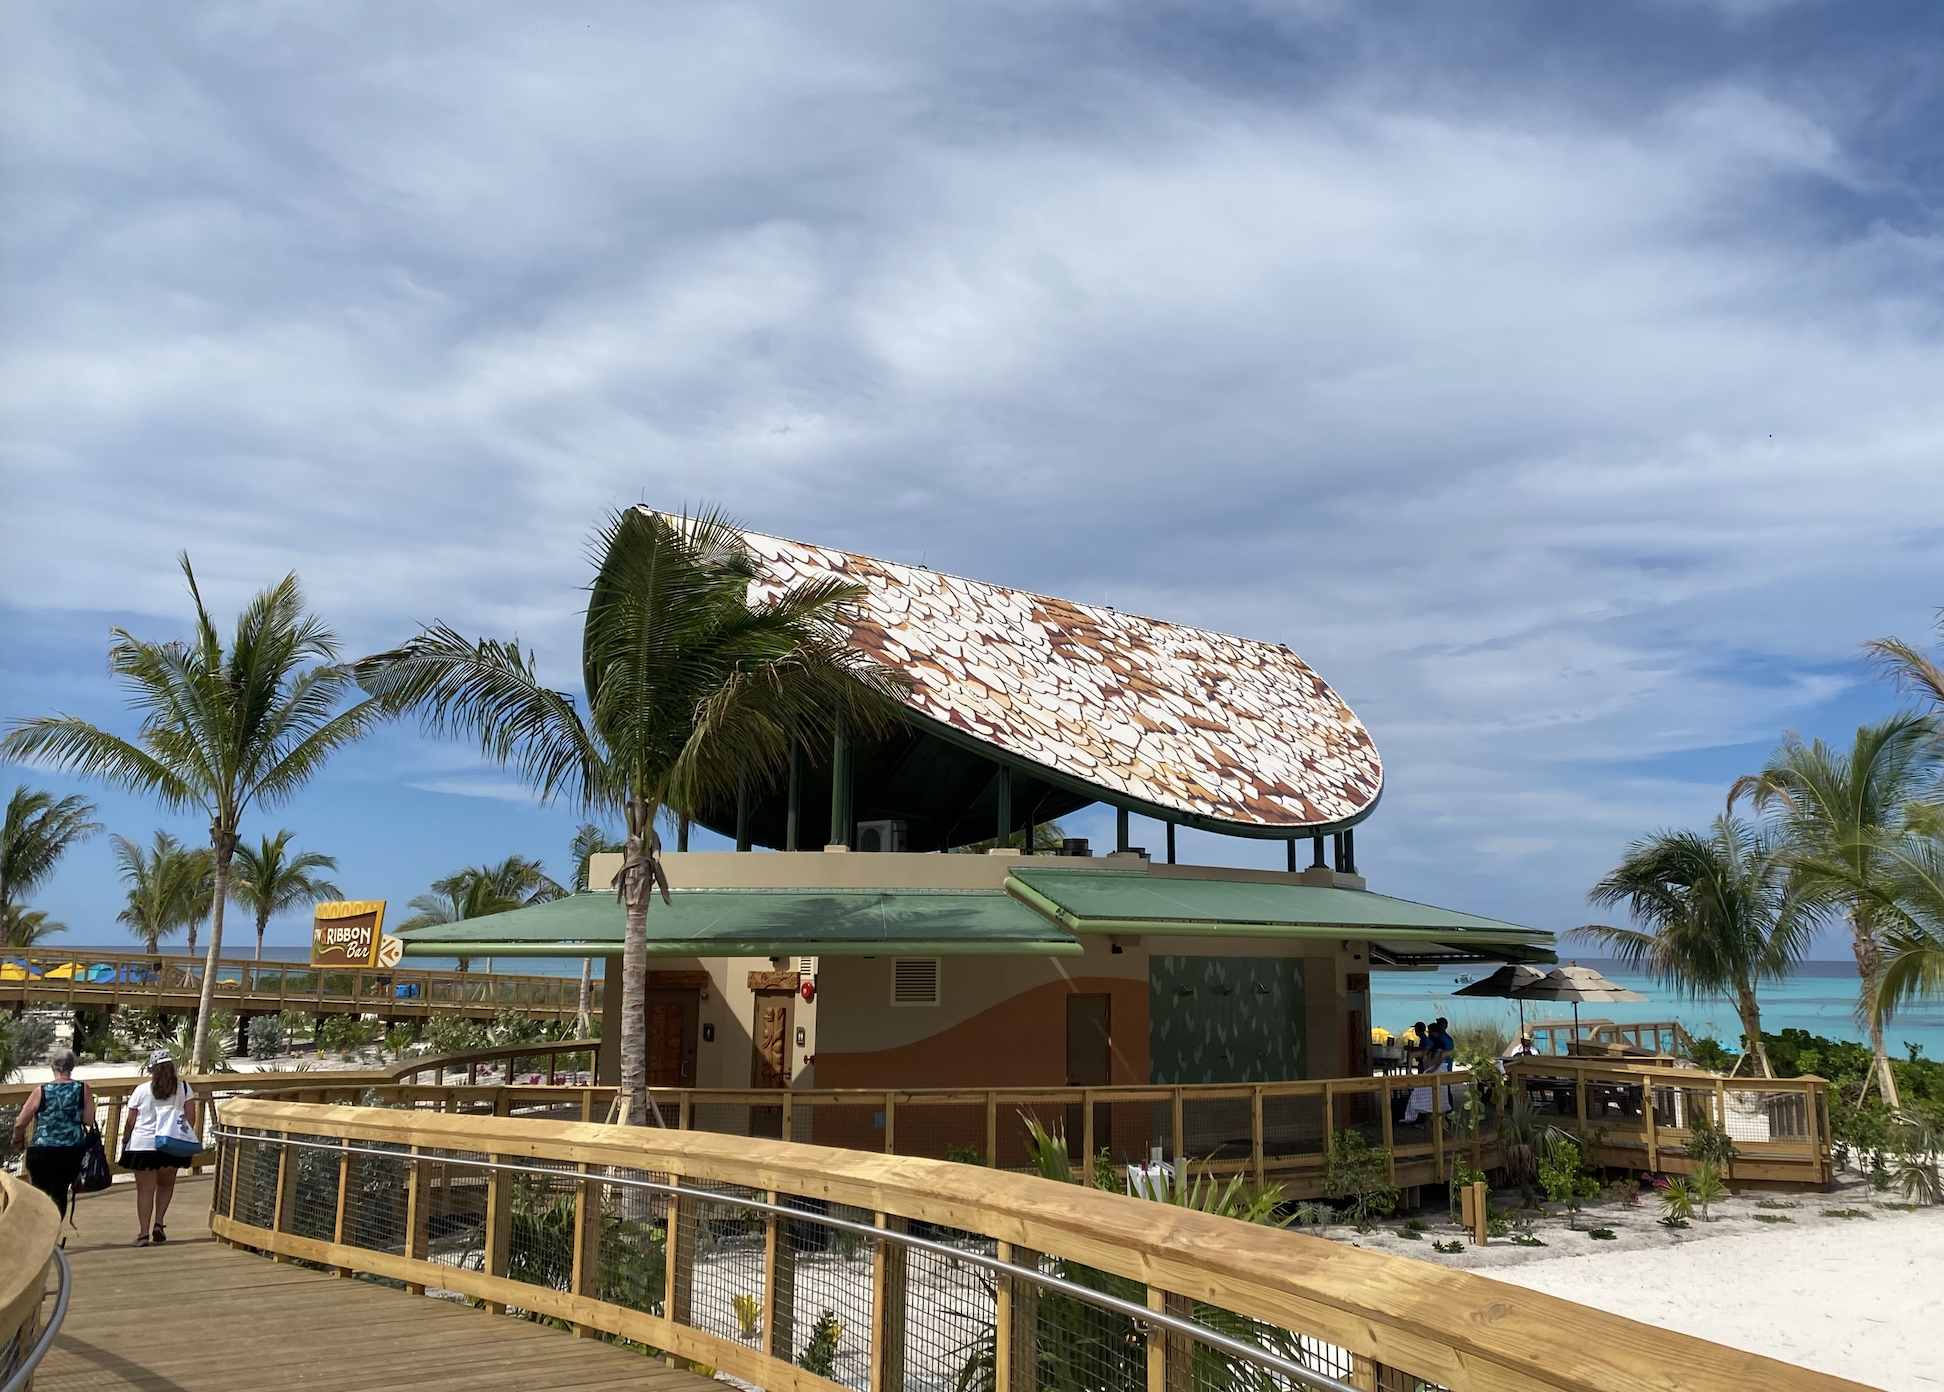 A beachfront hut with a unique curved patterned roof, surrounded by palm trees and a wooden boardwalk with people walking. Ocean visible in the background